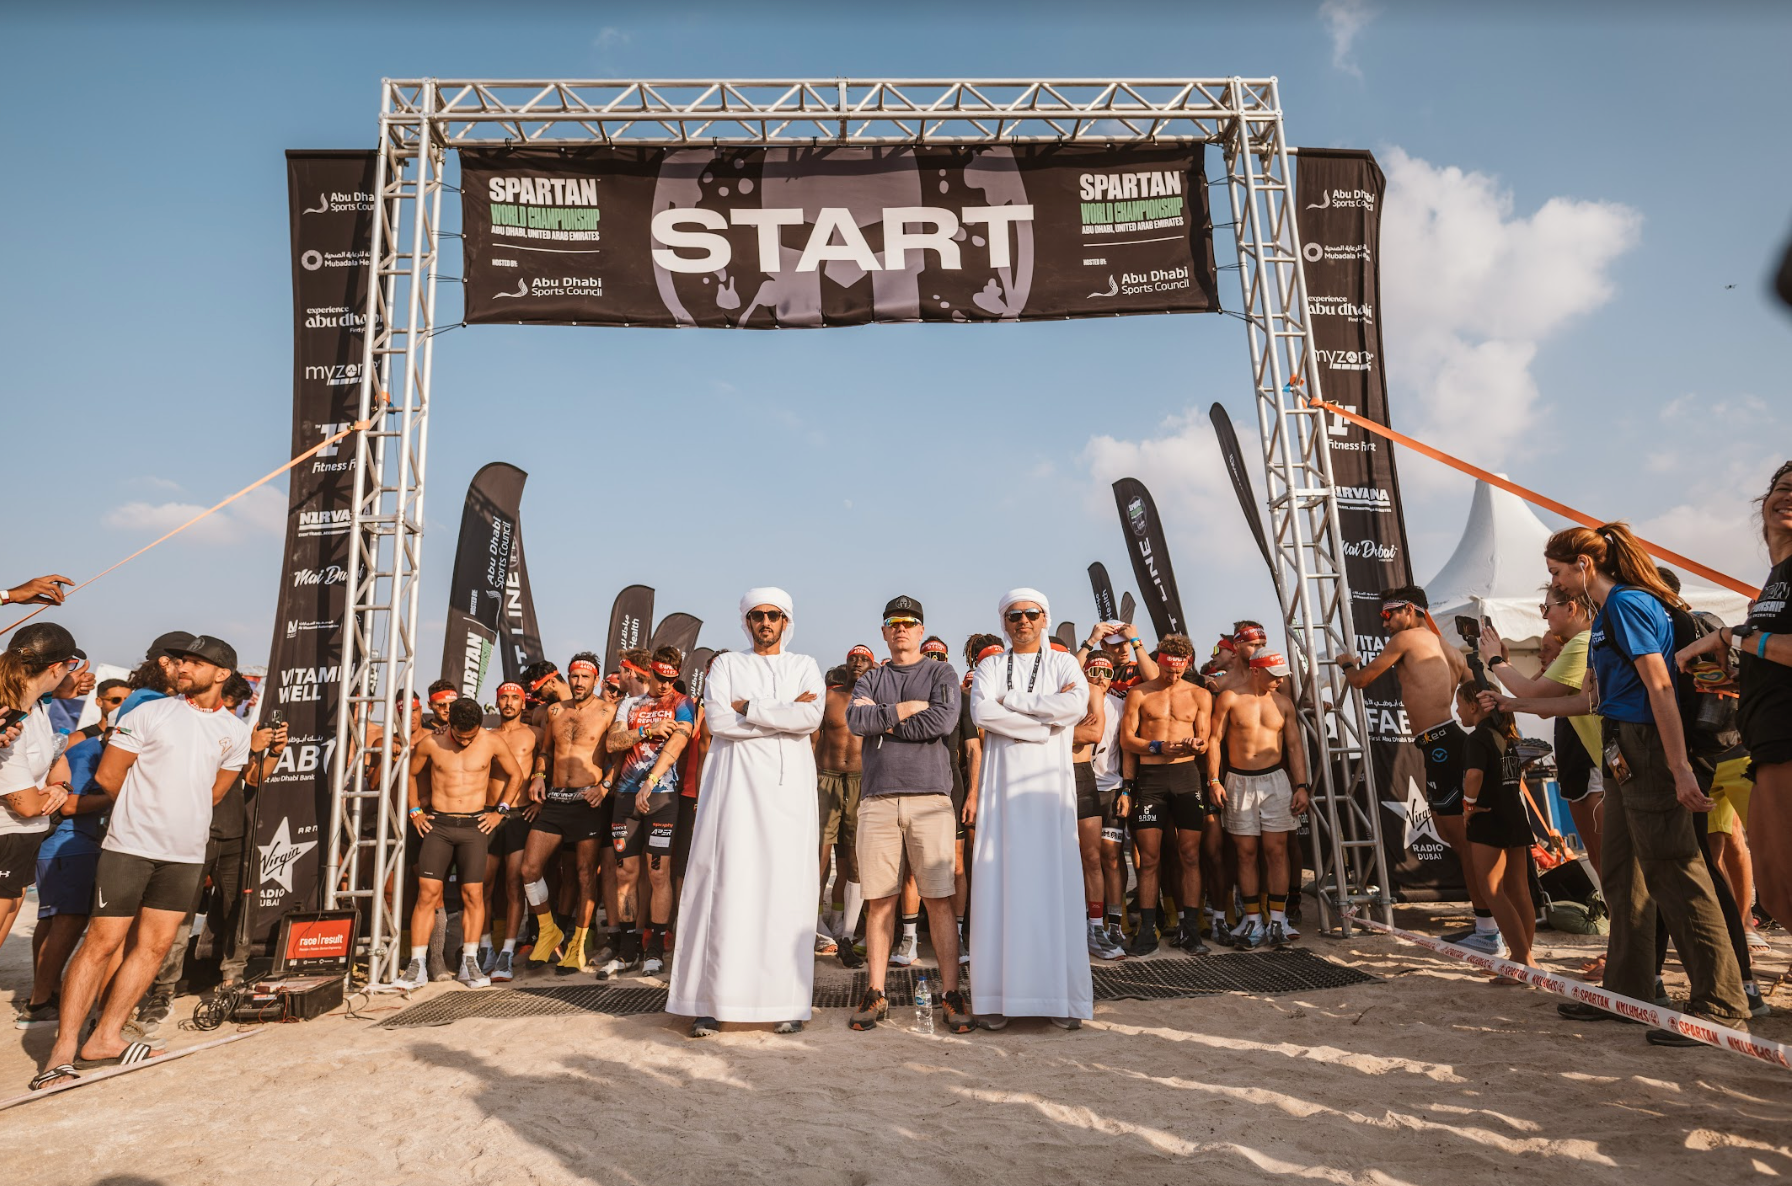 spartan ceo joe de sena and racers standing at the start line of the spartan world championship